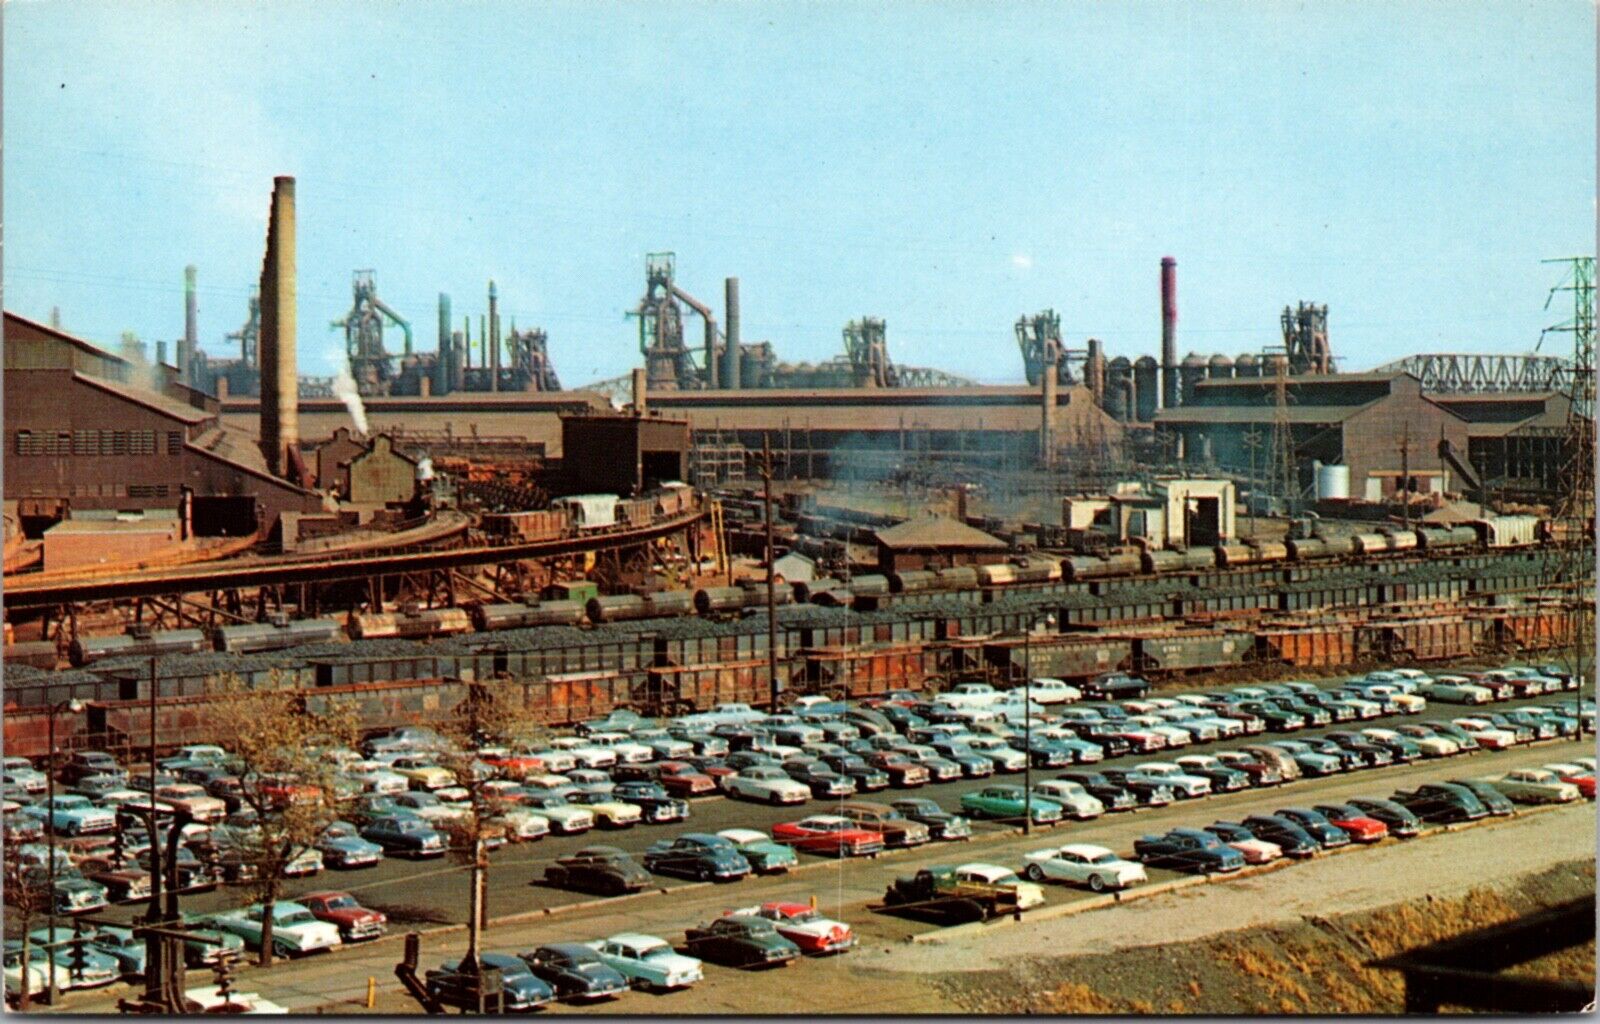 Postcard United States Steel Corporation in Gary, Indiana